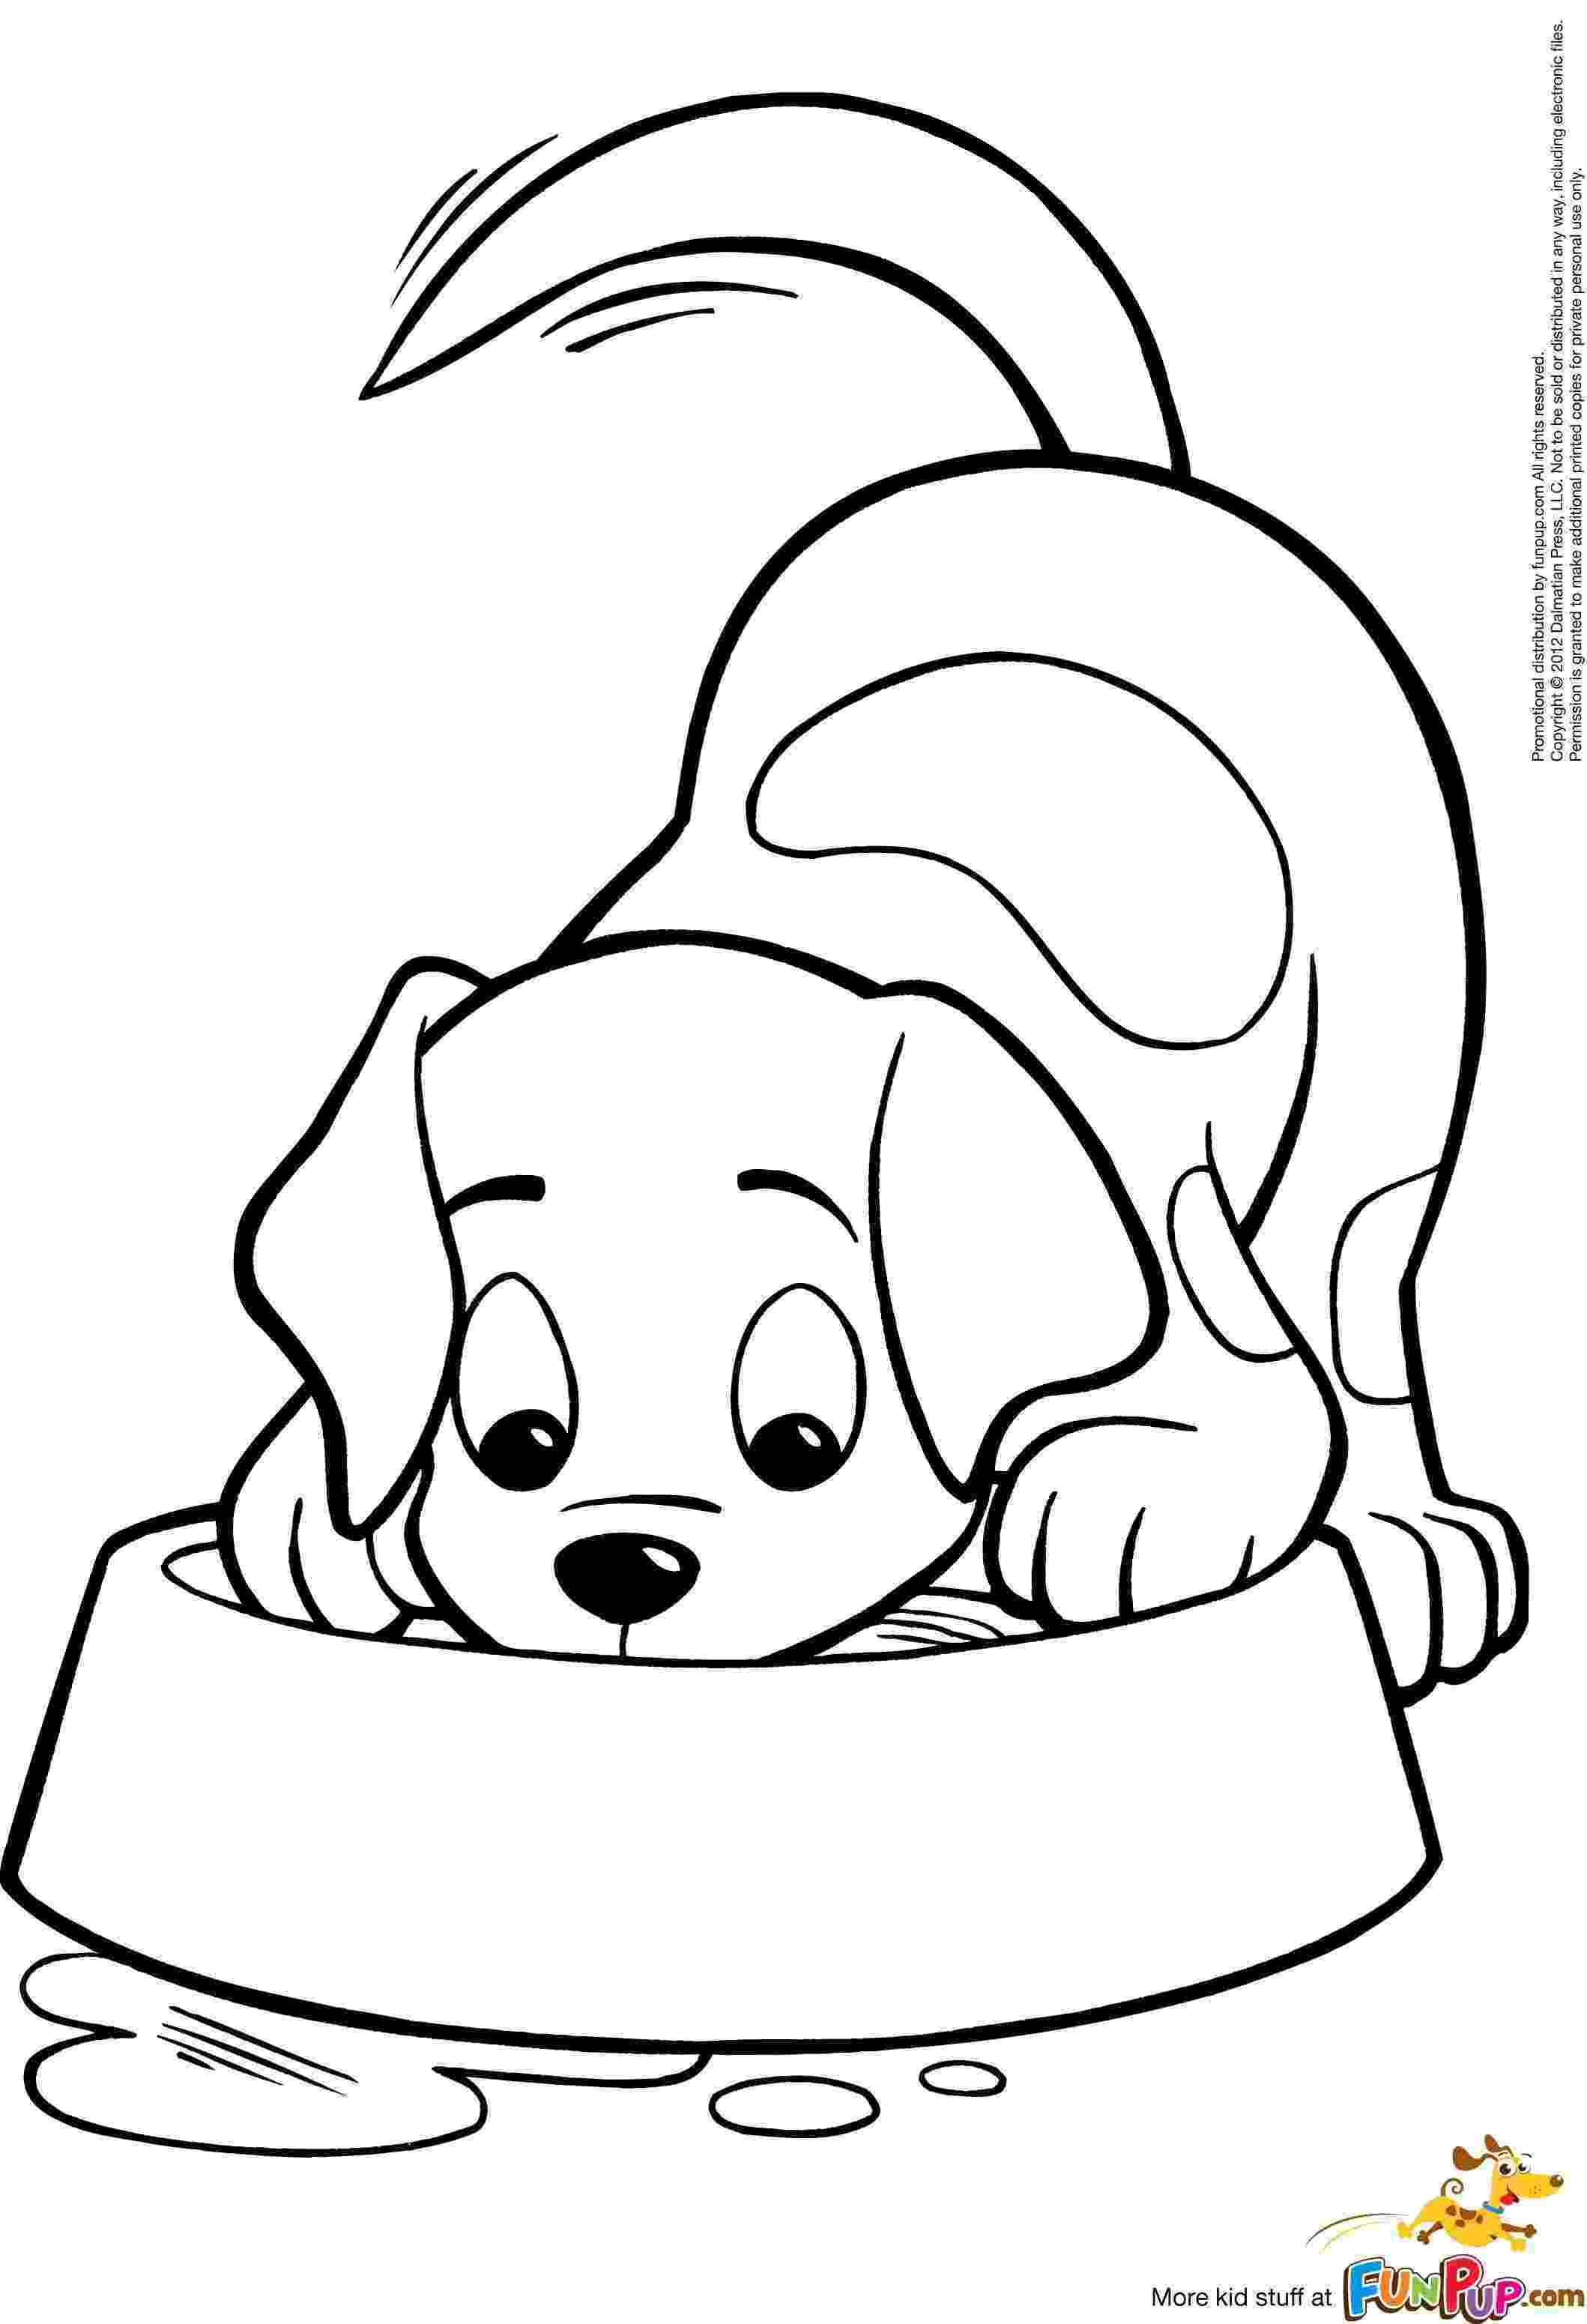 puppy coloring page free printable puppies coloring pages for kids coloring page puppy 